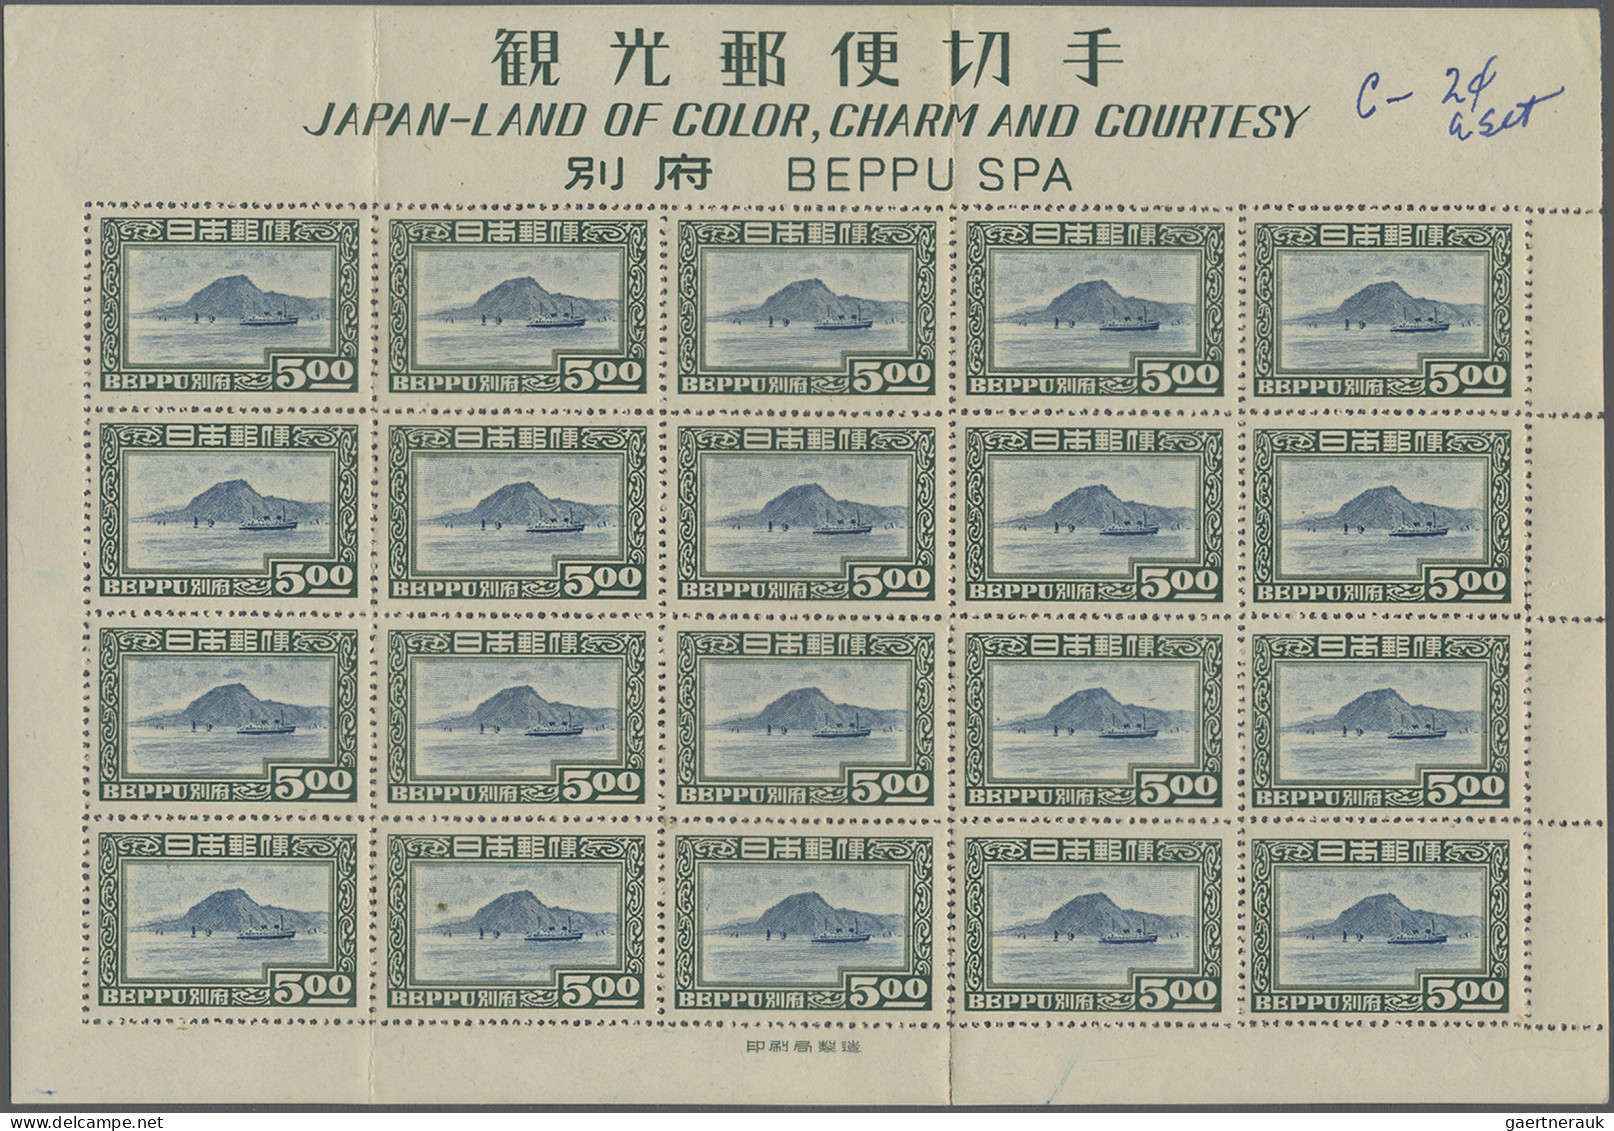 Japan: 1940/1964, mint never hinged MNH commemoratives in sheets or units